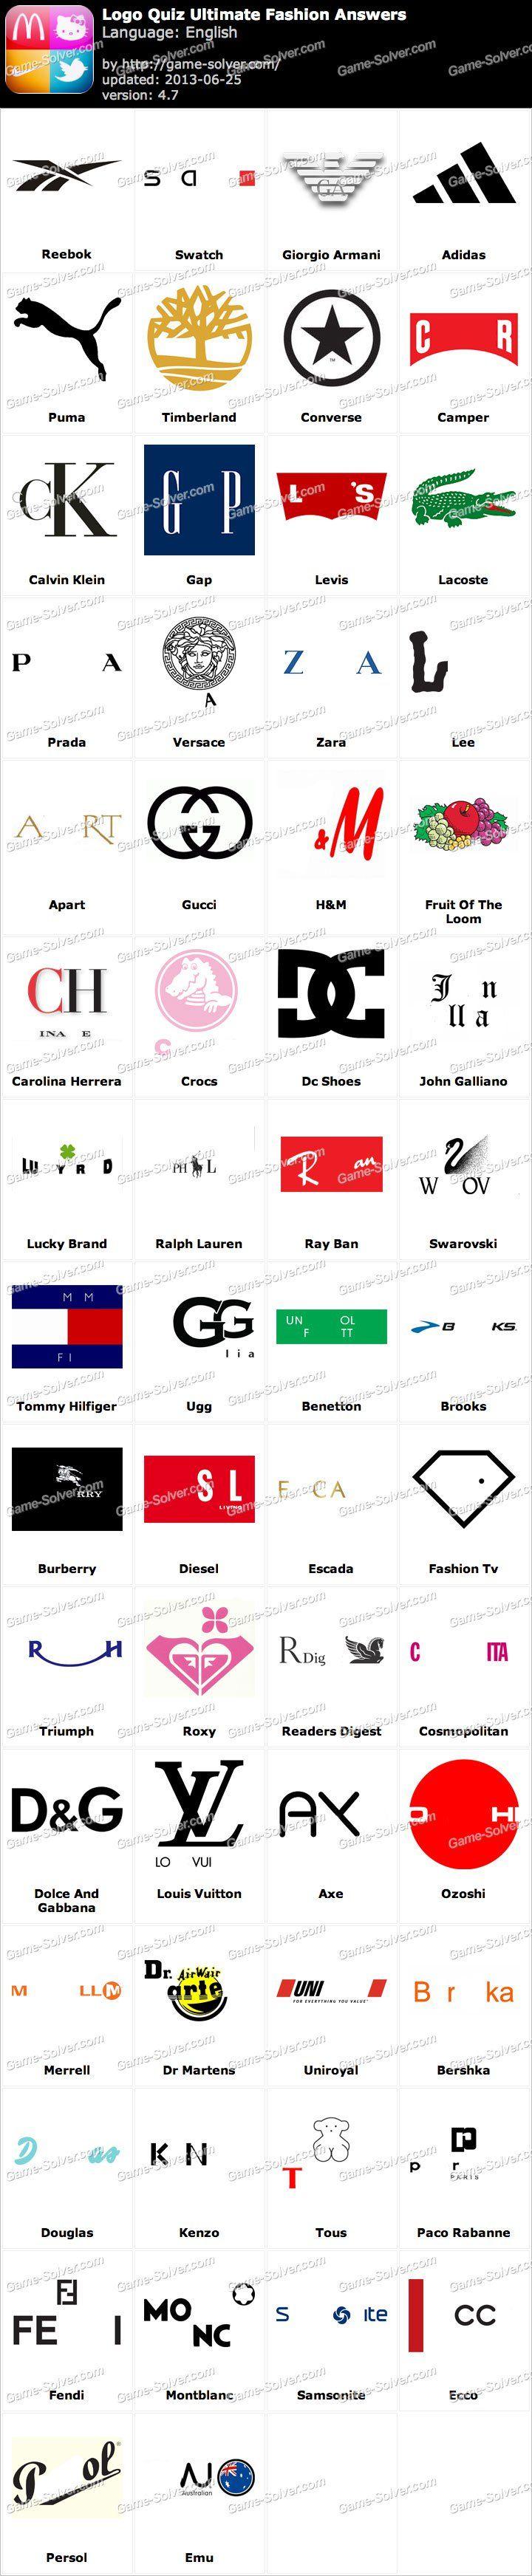 Famous Clothing Company Logo - Logo Quiz Ultimate Fashion Answers - Game Solver